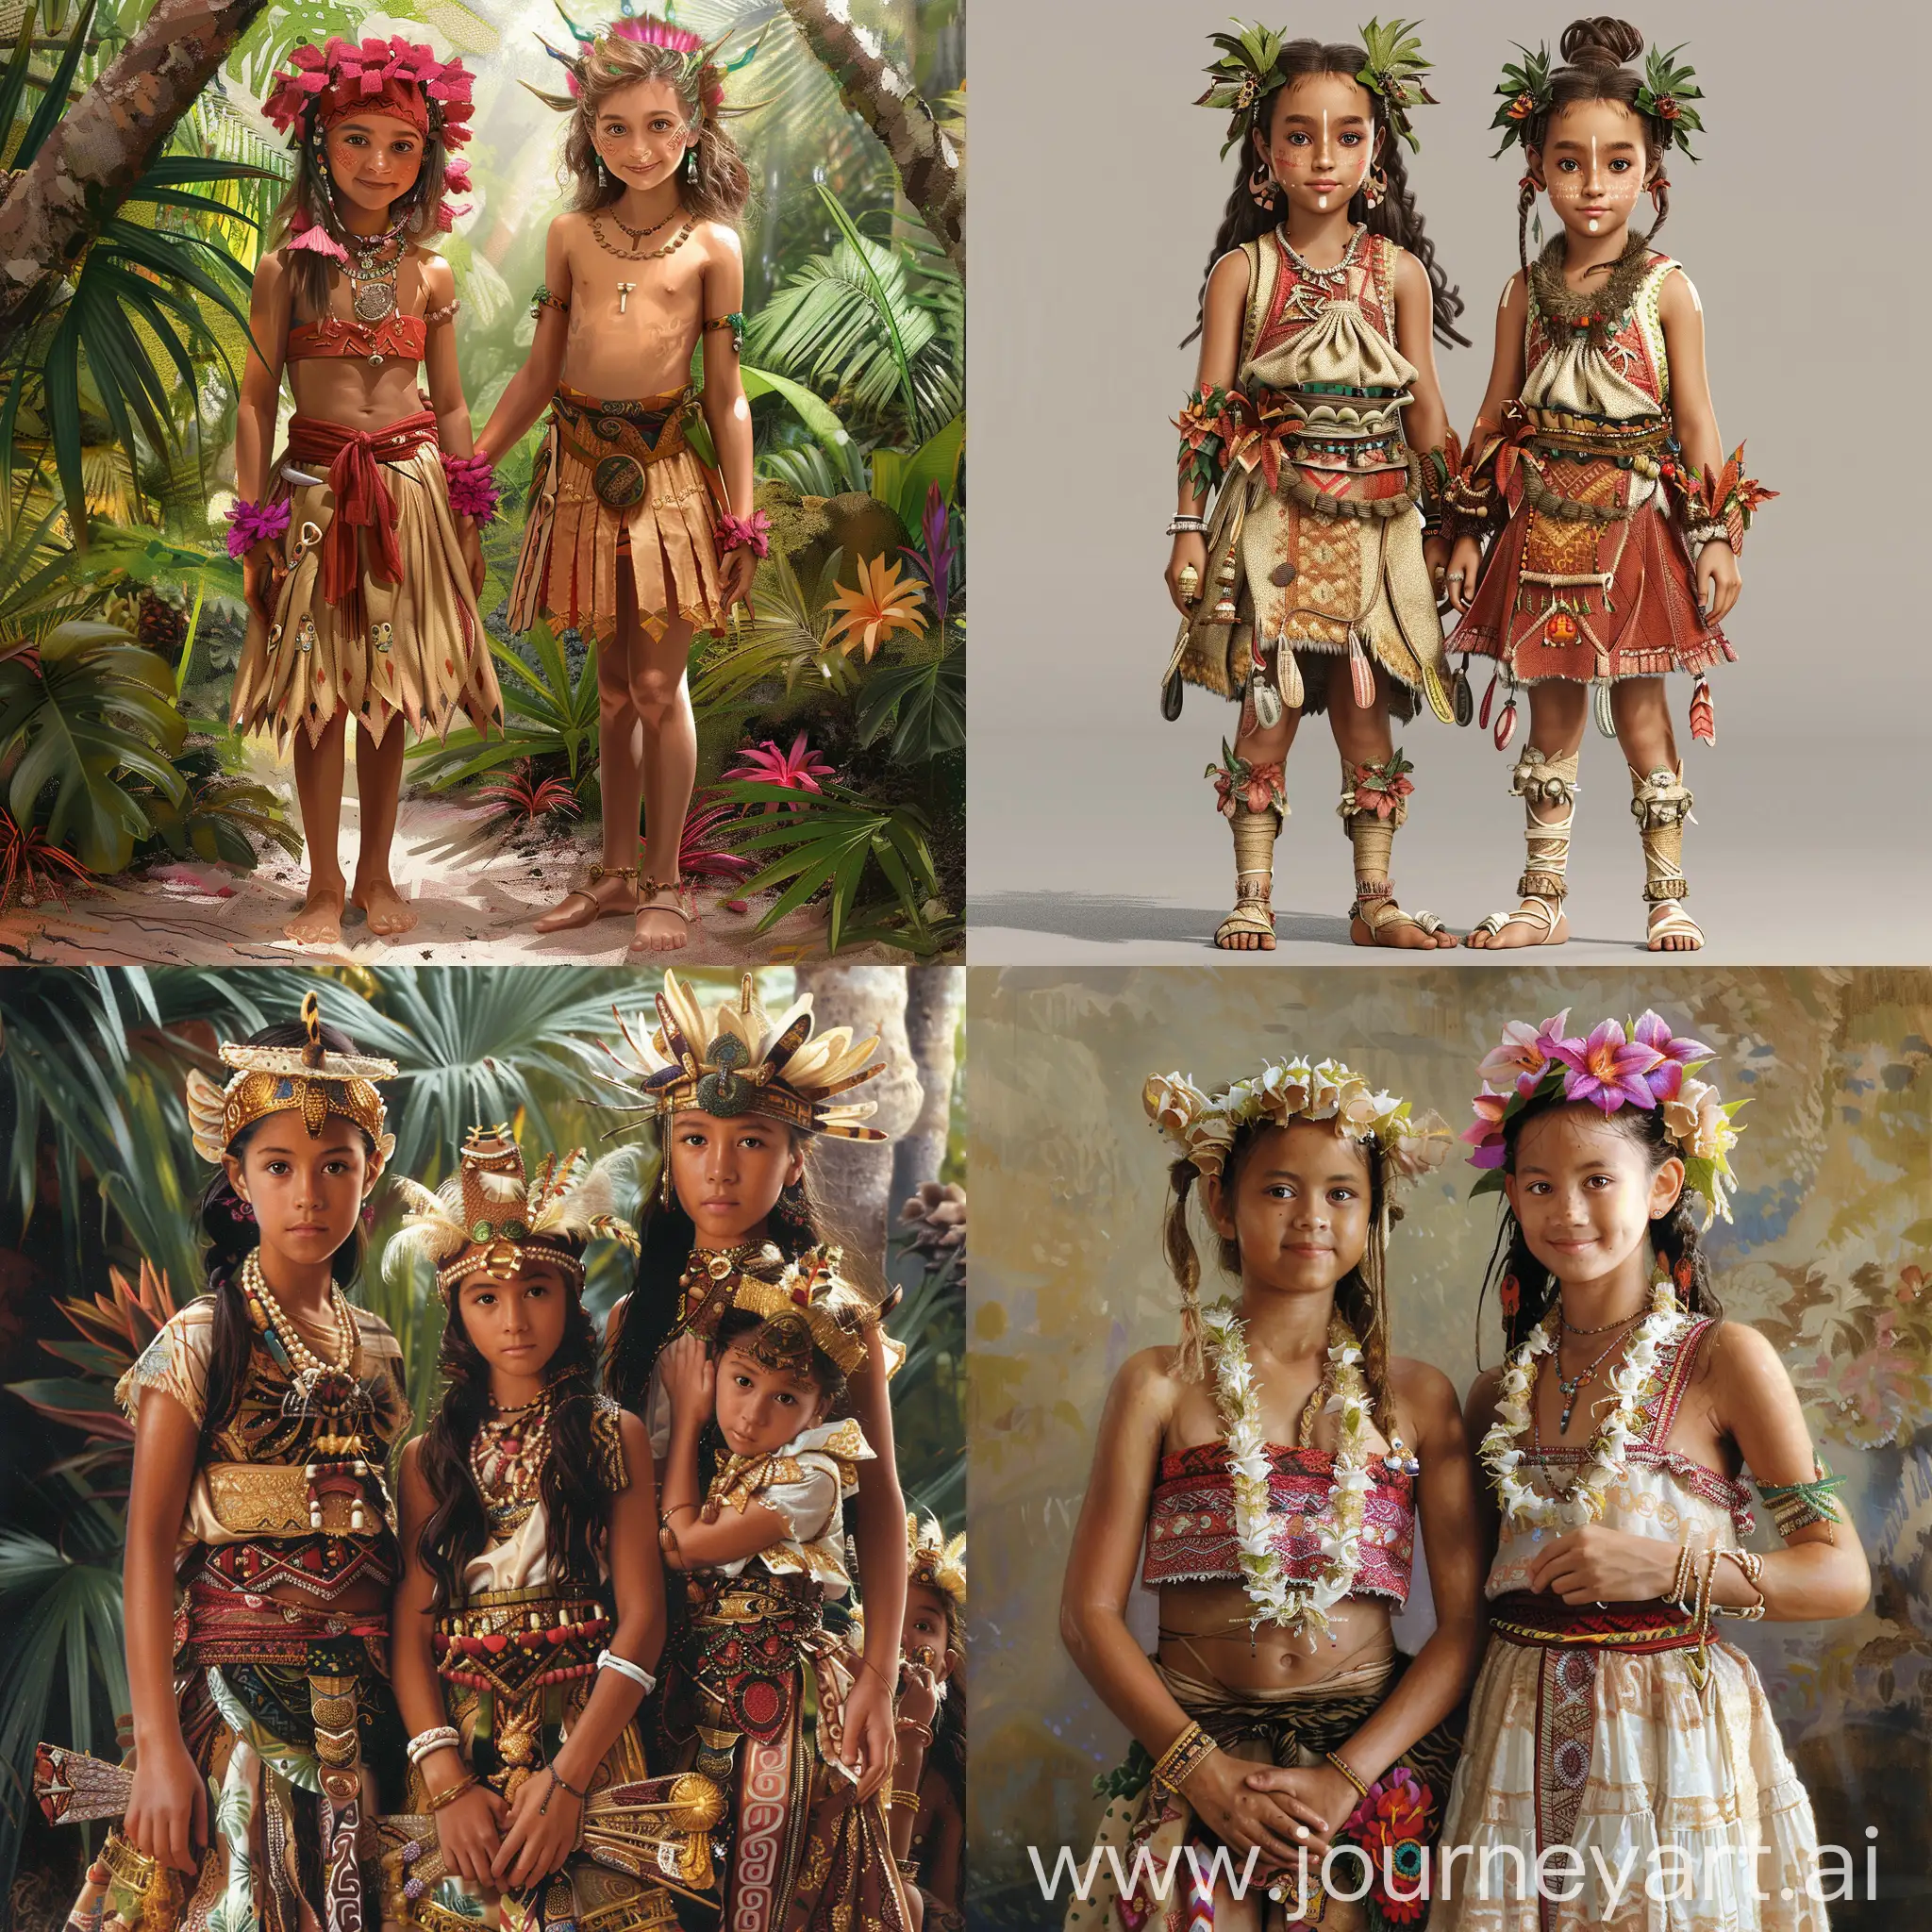 Young Minoan girls in their traditional, high detailed, full body costumes